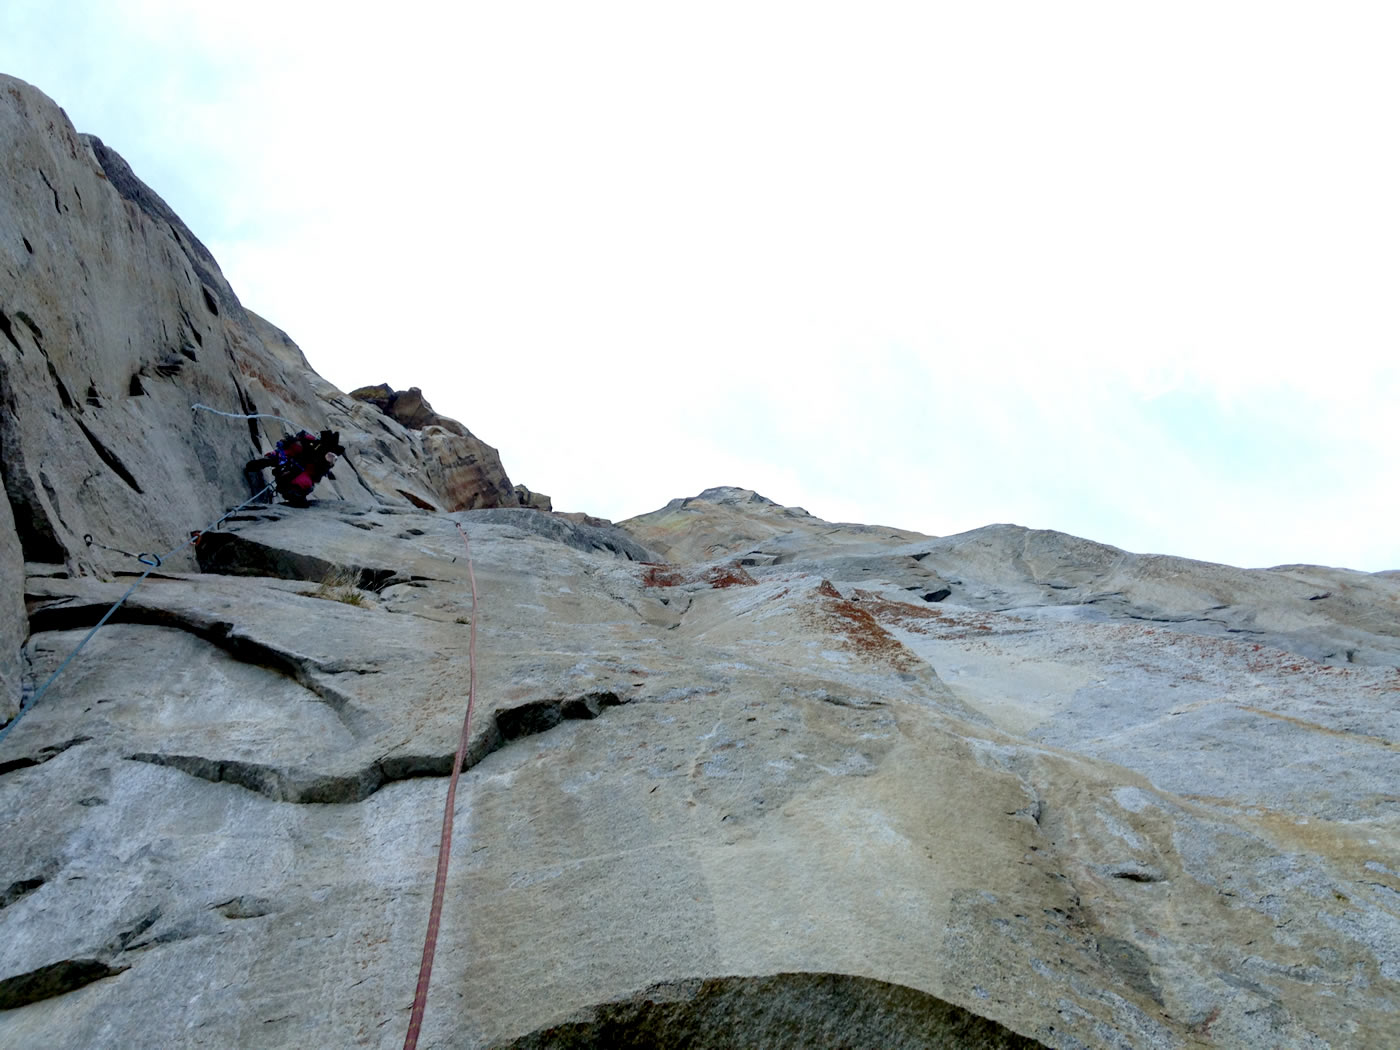 Josie McKee leading the last block to the top of Lost Arrow Spire on Day 2. [Photo] Quinn Brett